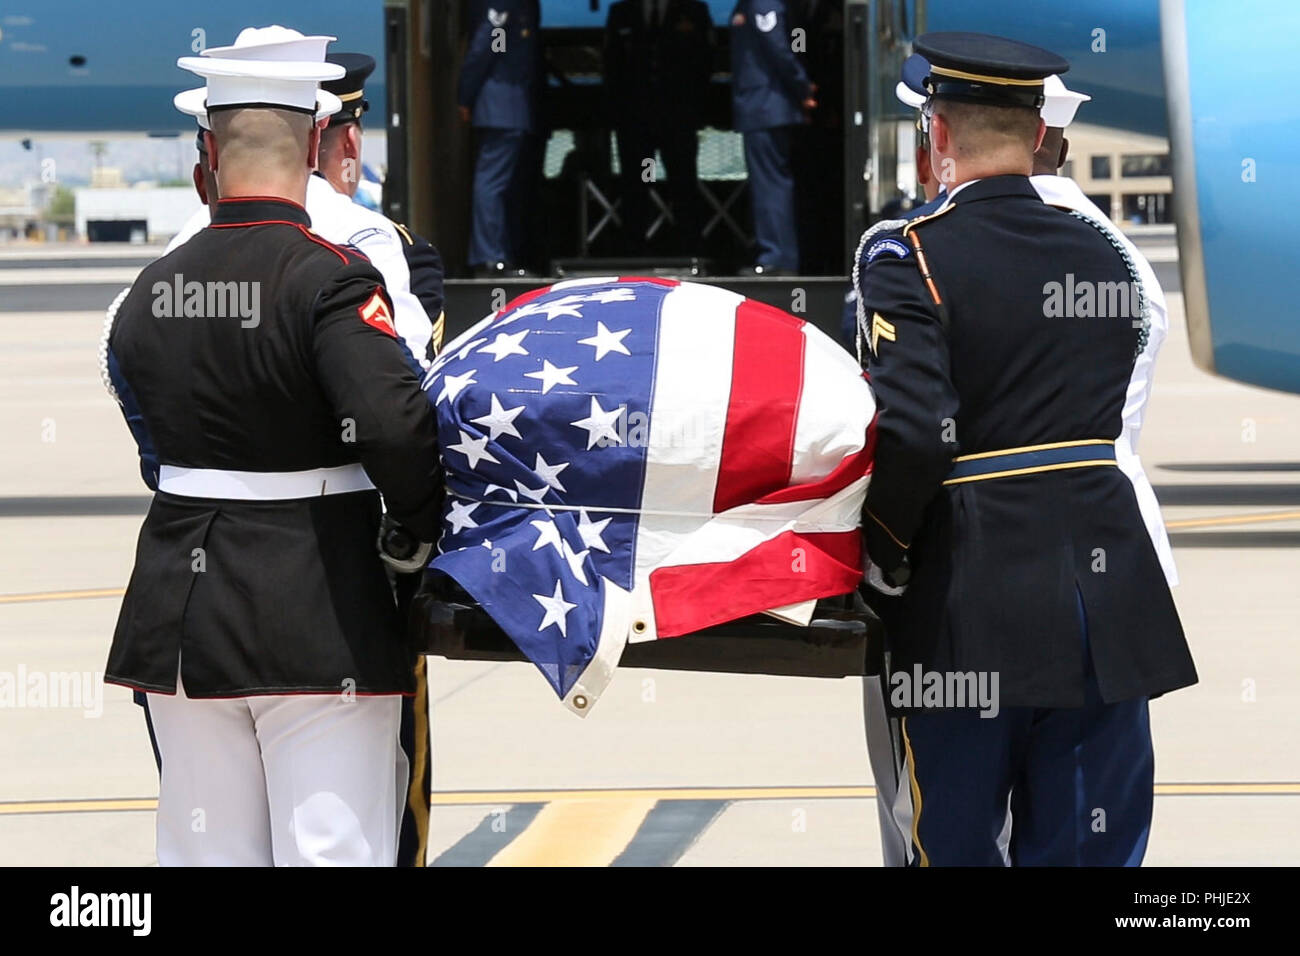 The flag draped casket of Sen. John McCain is carried by a Joint Service honor guard for transport to Washington, DC August 29, 2018 in Phoenix, Arizona. The former senator’s remains will lie in state in the U.S. Capitol Rotunda before burial at the U.S. Naval Academy. Stock Photo